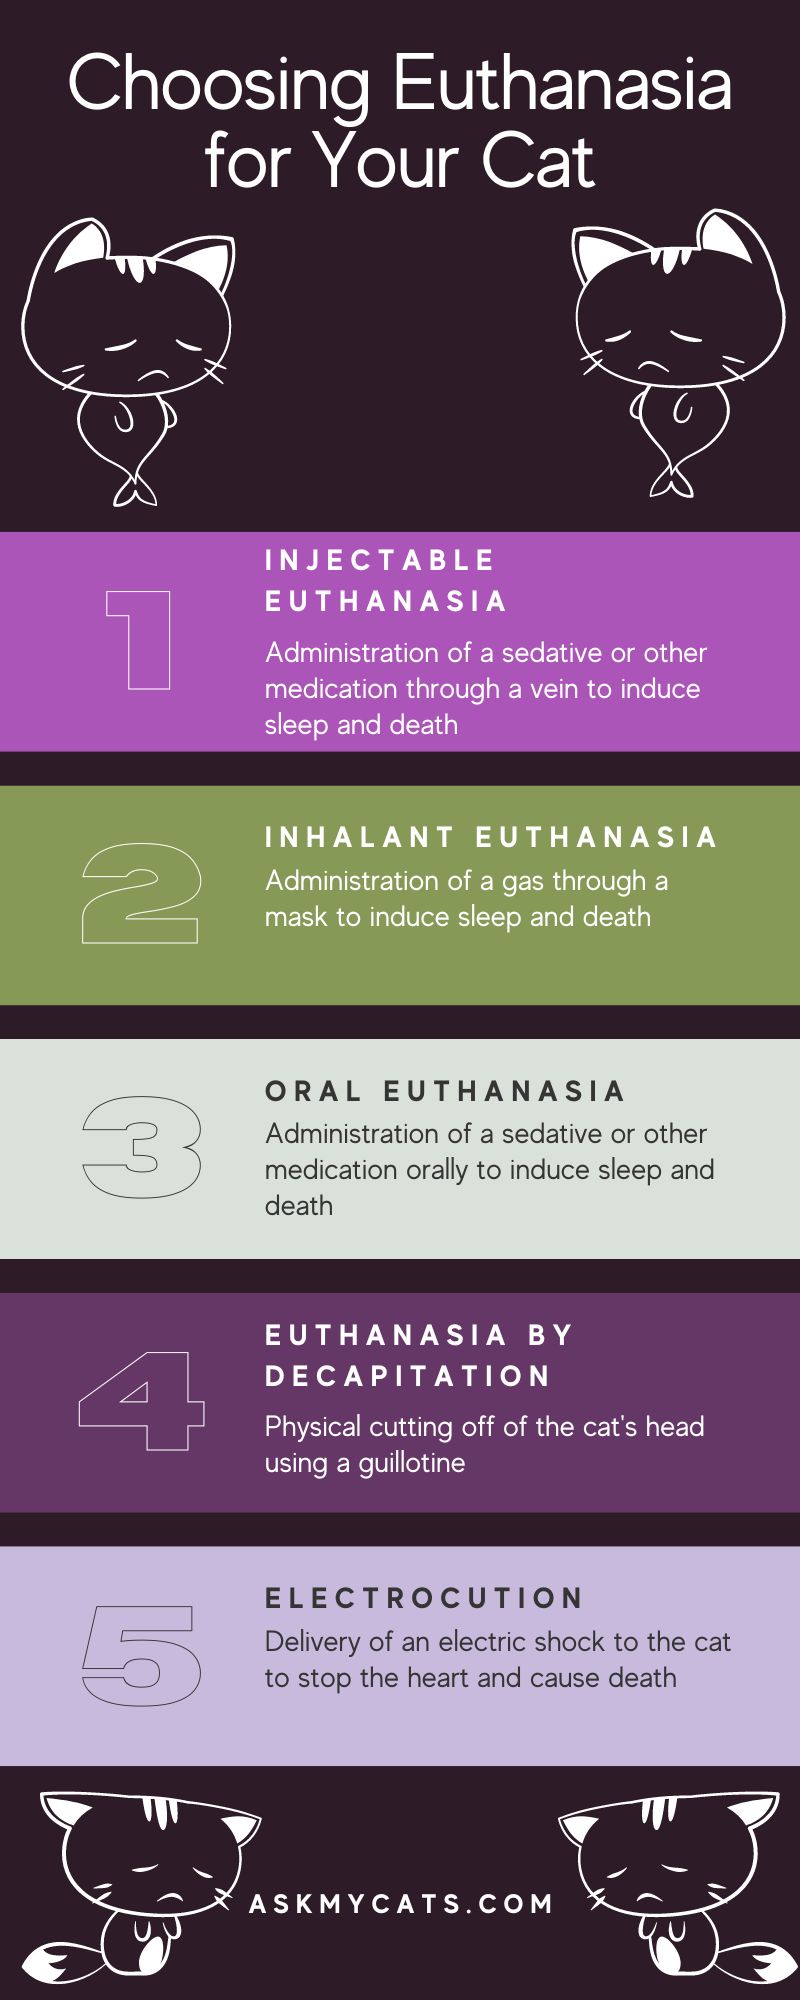 Choosing Euthanasia for Your Cat